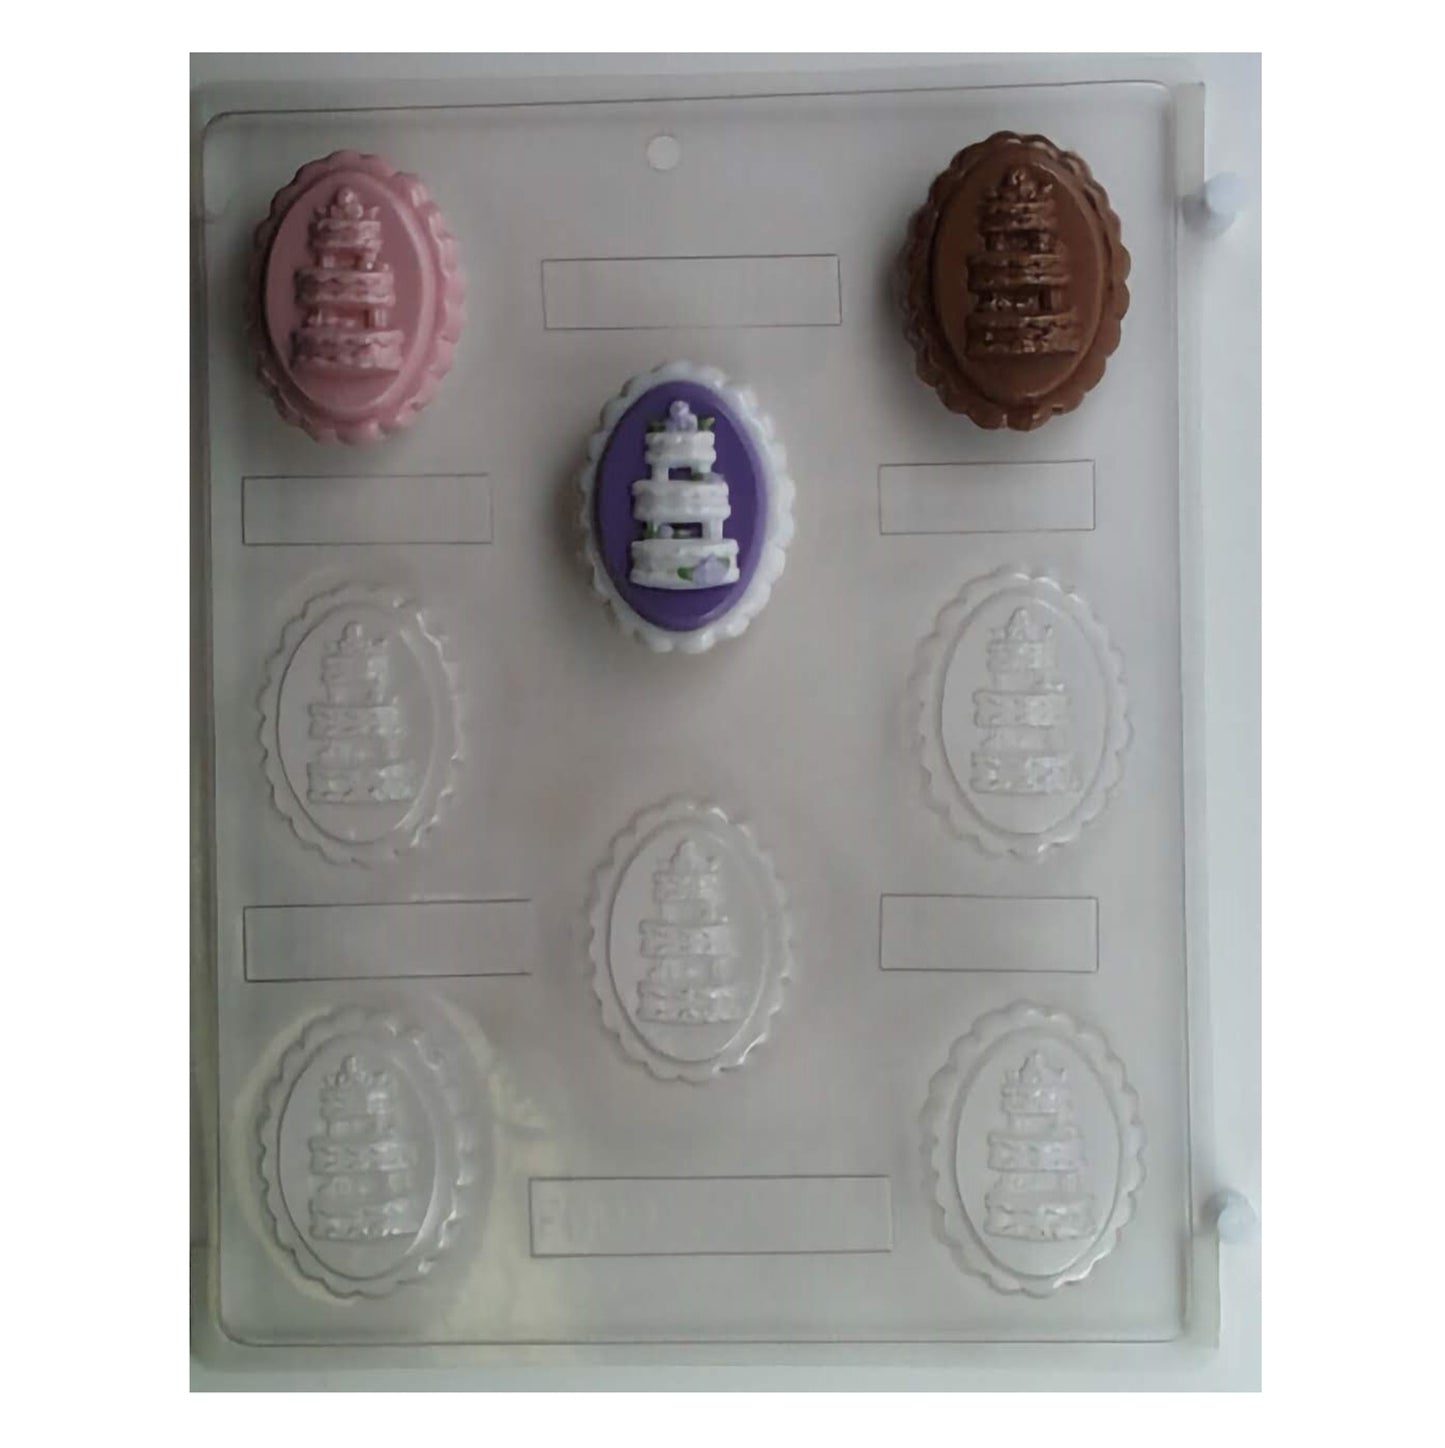  A clear plastic chocolate mold designed for creating wedding cake-shaped chocolates, featuring intricate tiers and decorations, perfect for wedding favors or bridal shower treats